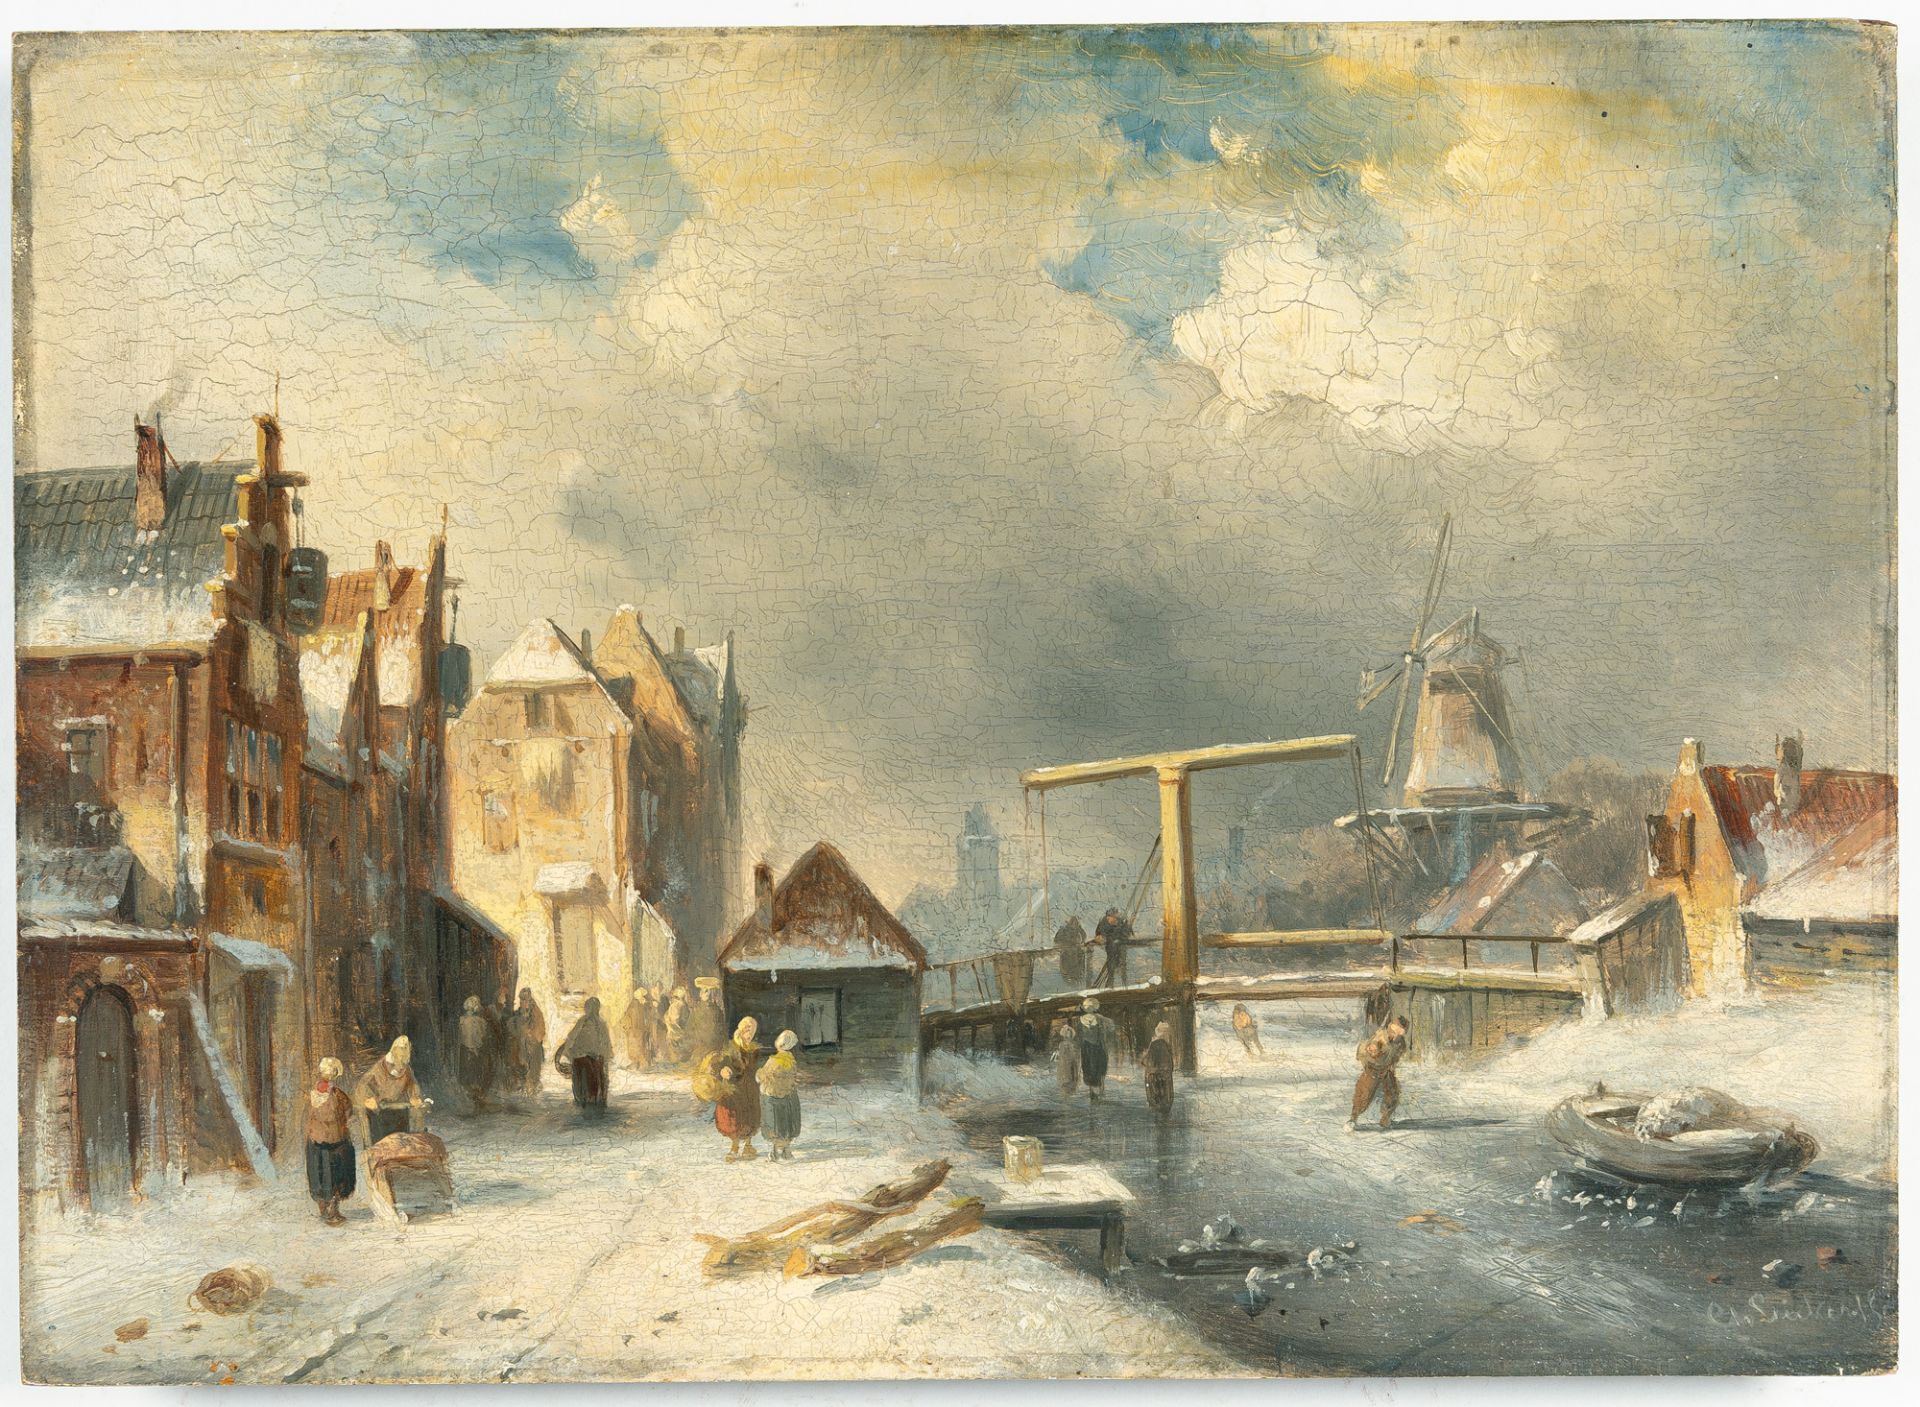 Charles Henri Joseph Leickert – Winter village scene on a canal with a Dutch windmill - Image 2 of 3